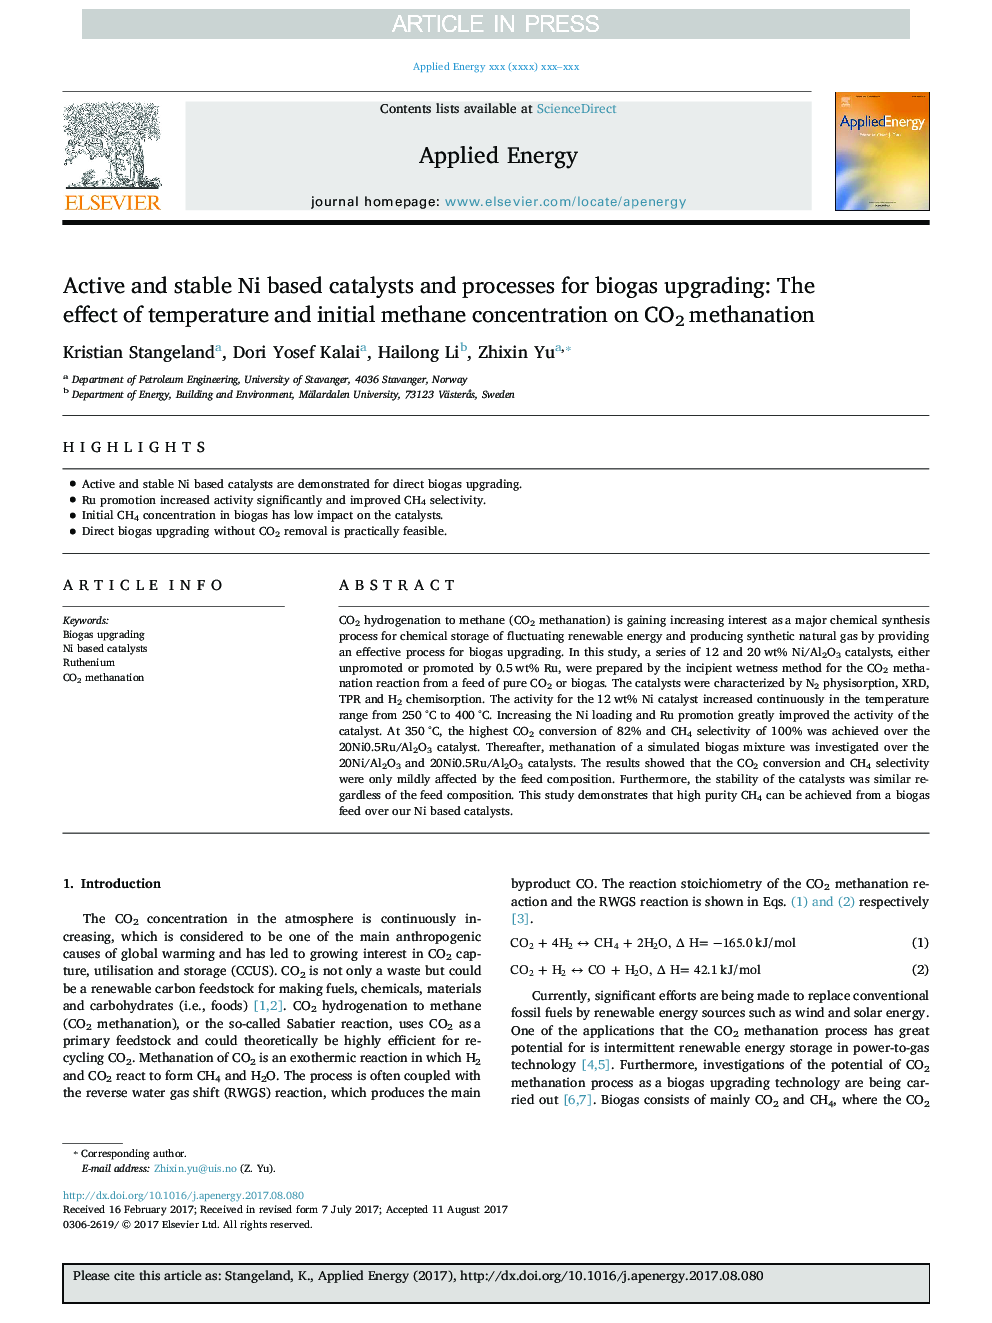 Active and stable Ni based catalysts and processes for biogas upgrading: The effect of temperature and initial methane concentration on CO2 methanation